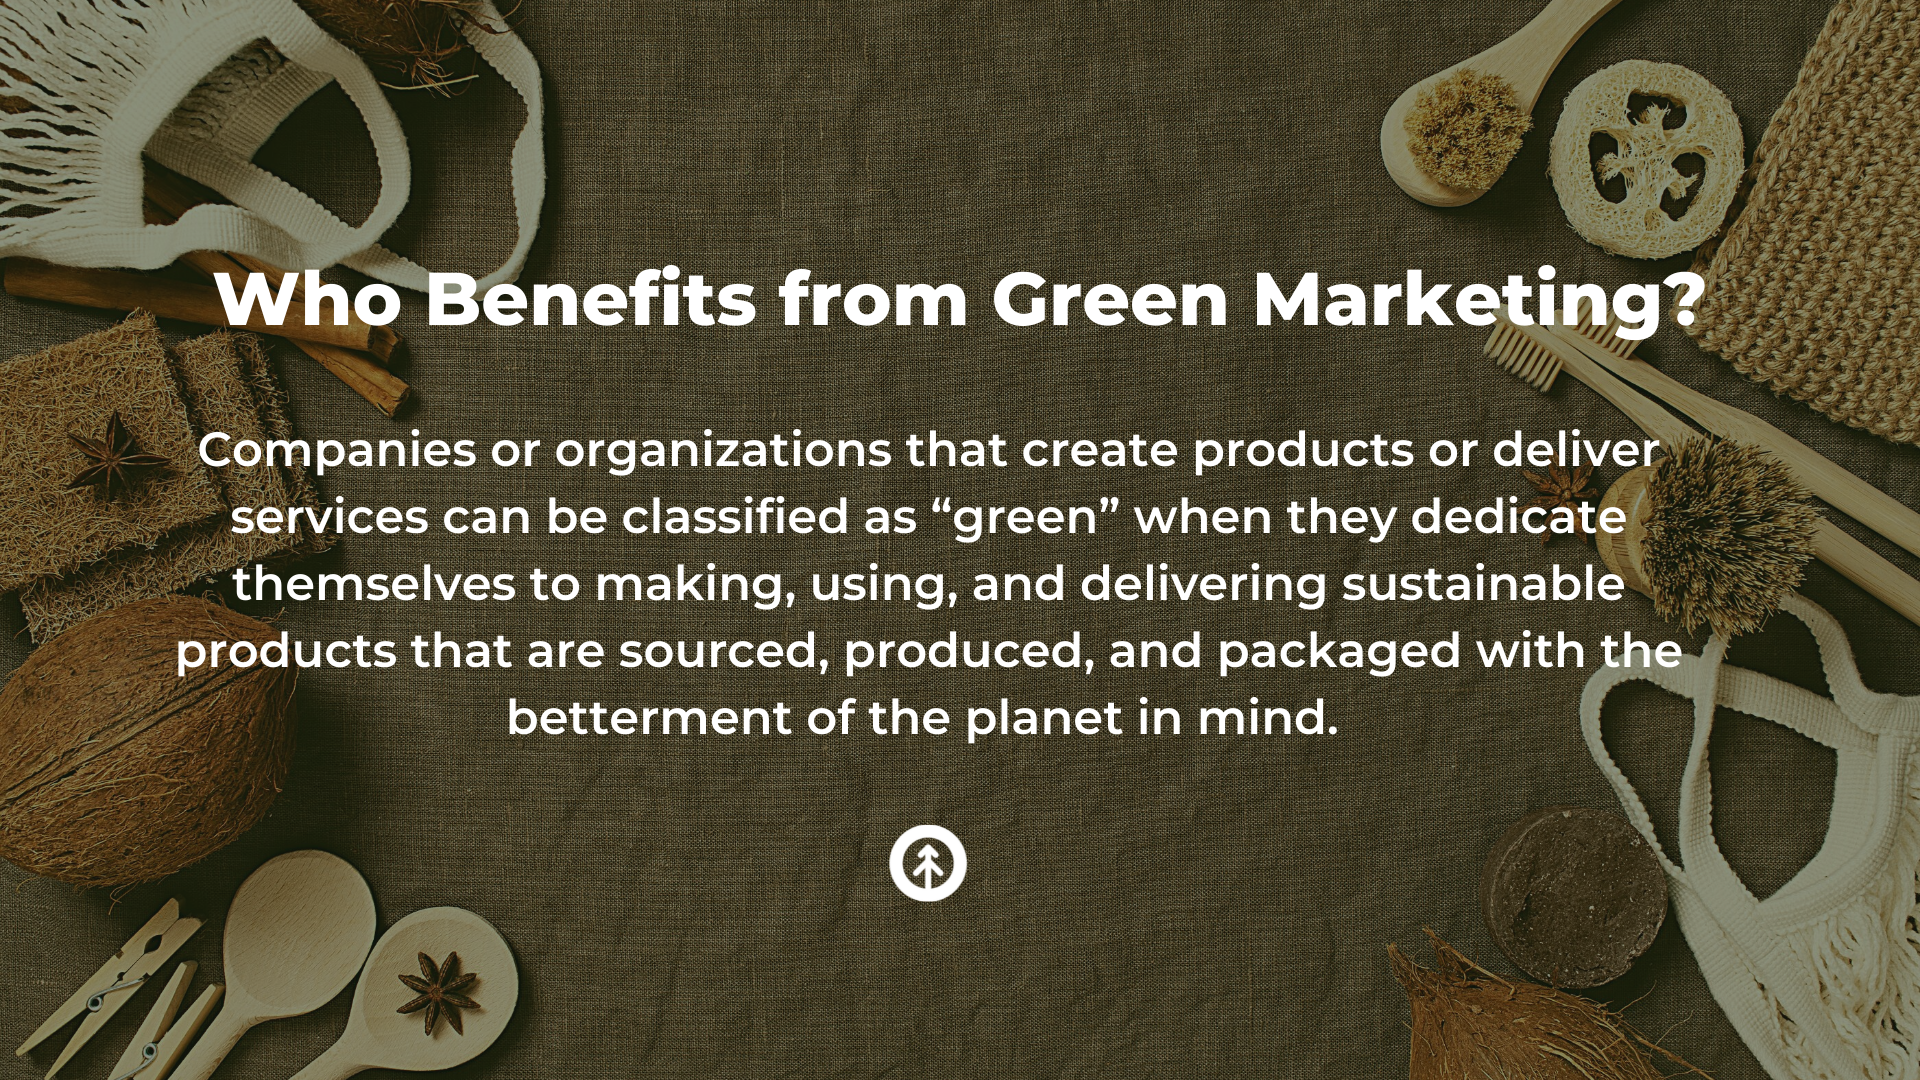 A collection of bathroom and kitchen items that are sustainably-designed, produced, and marketed with an infographic by Growth Marketing Firm about who benefits from green marketing. 